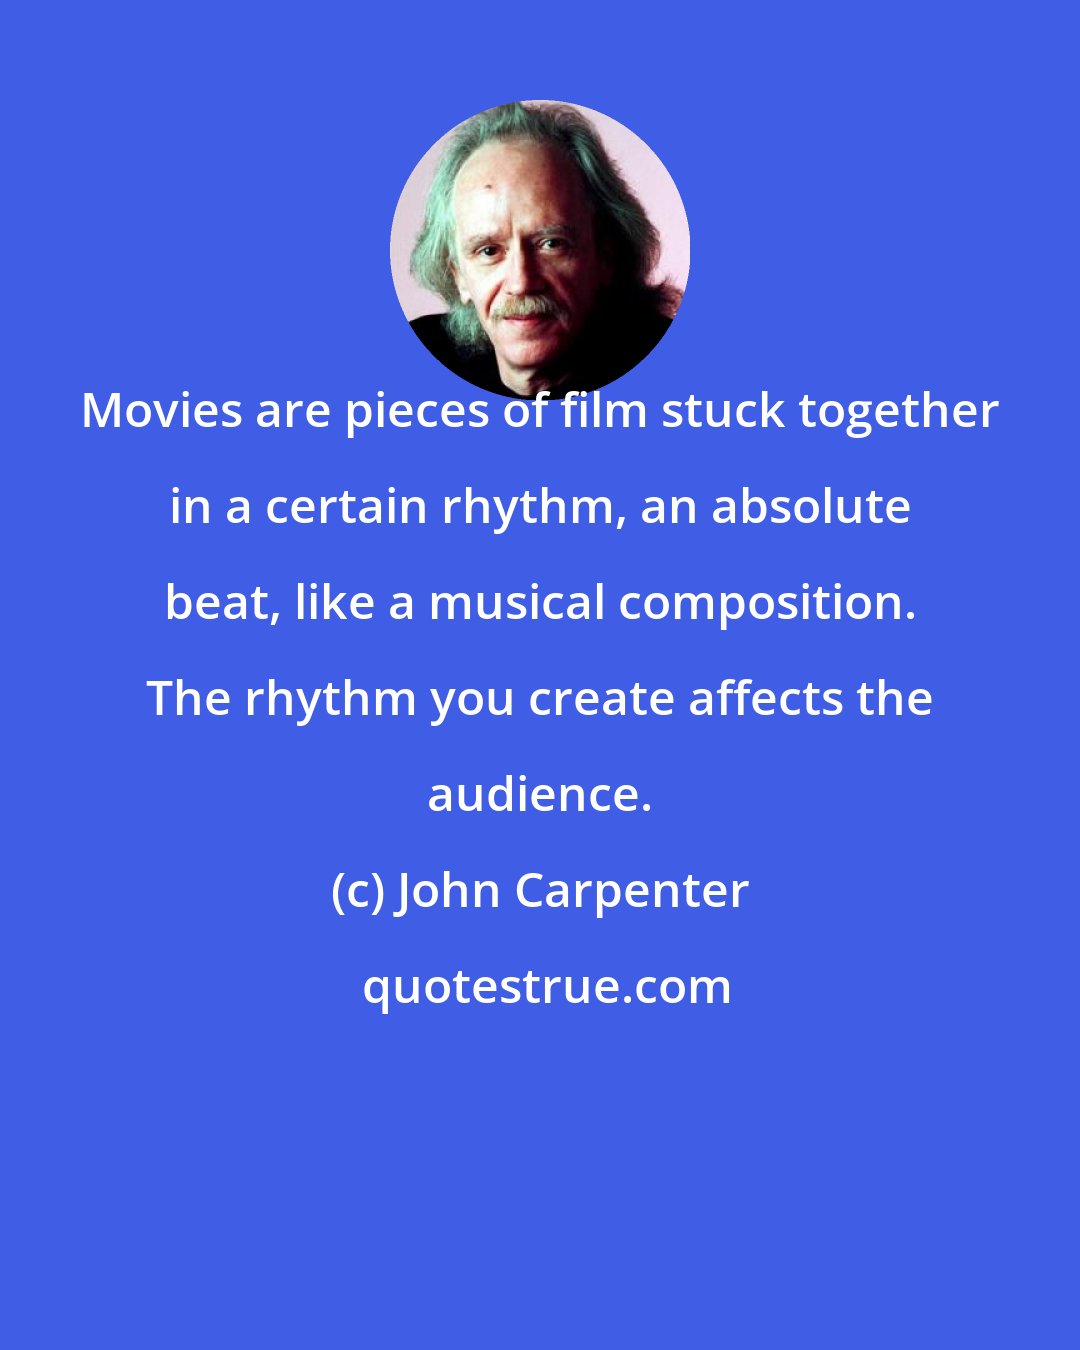 John Carpenter: Movies are pieces of film stuck together in a certain rhythm, an absolute beat, like a musical composition. The rhythm you create affects the audience.